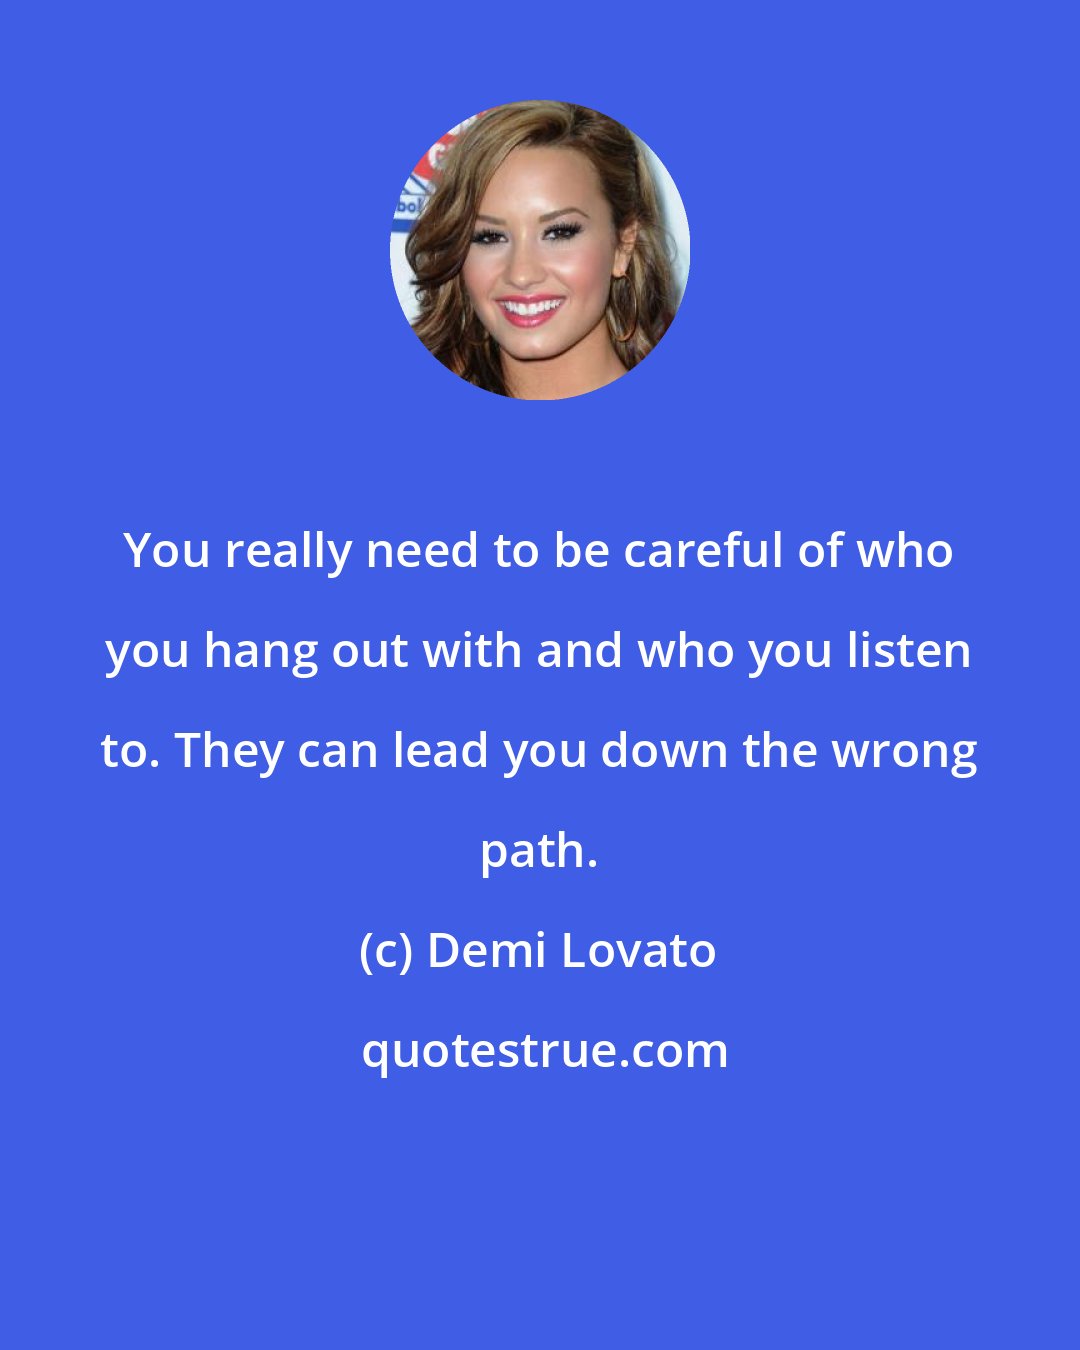 Demi Lovato: You really need to be careful of who you hang out with and who you listen to. They can lead you down the wrong path.